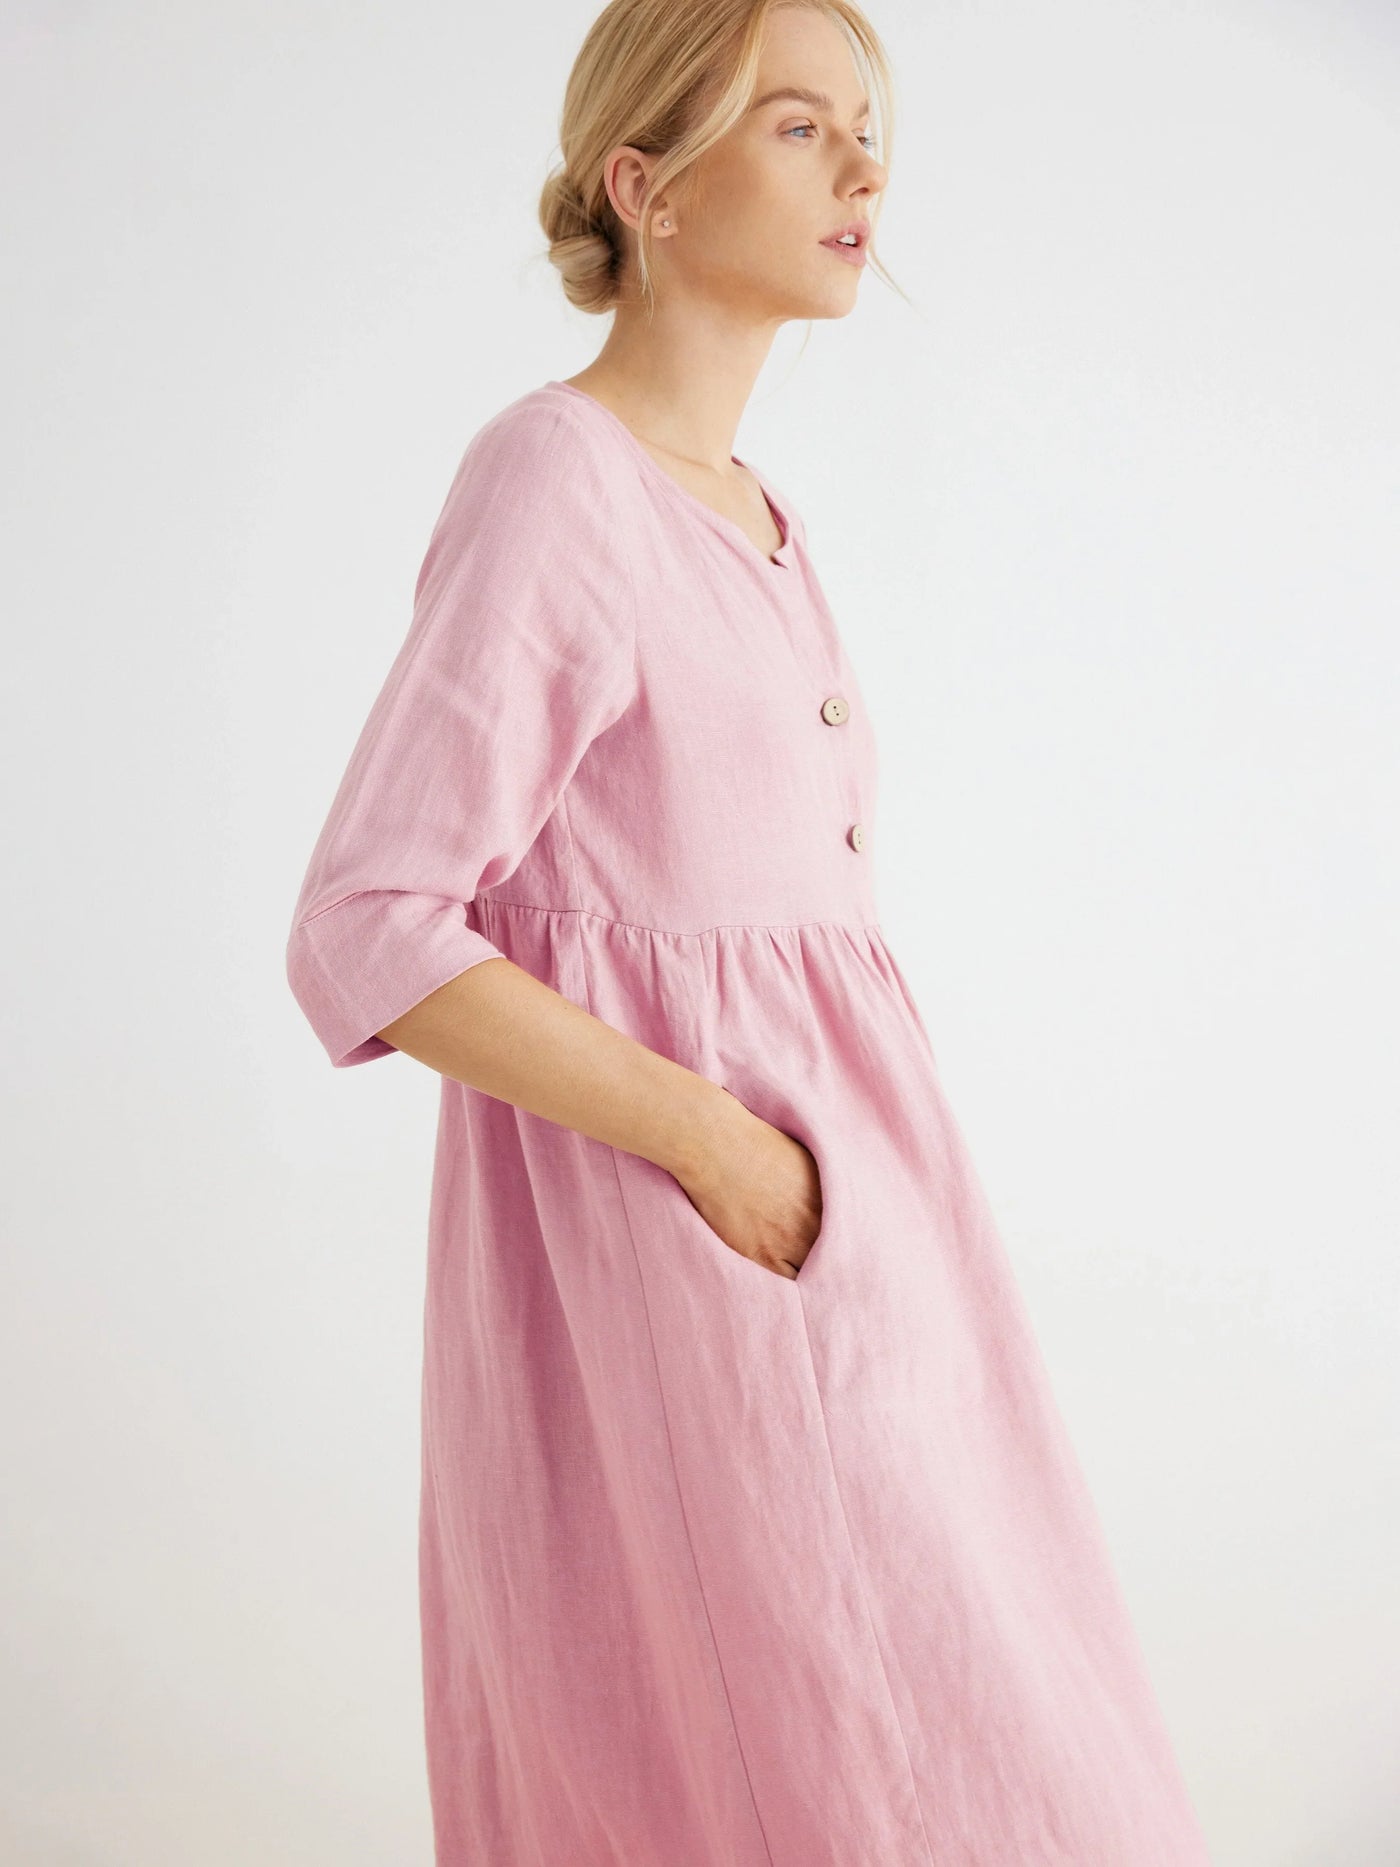 Chi-Chi 100% Linen Button Front Gathered Waist Swing Dress